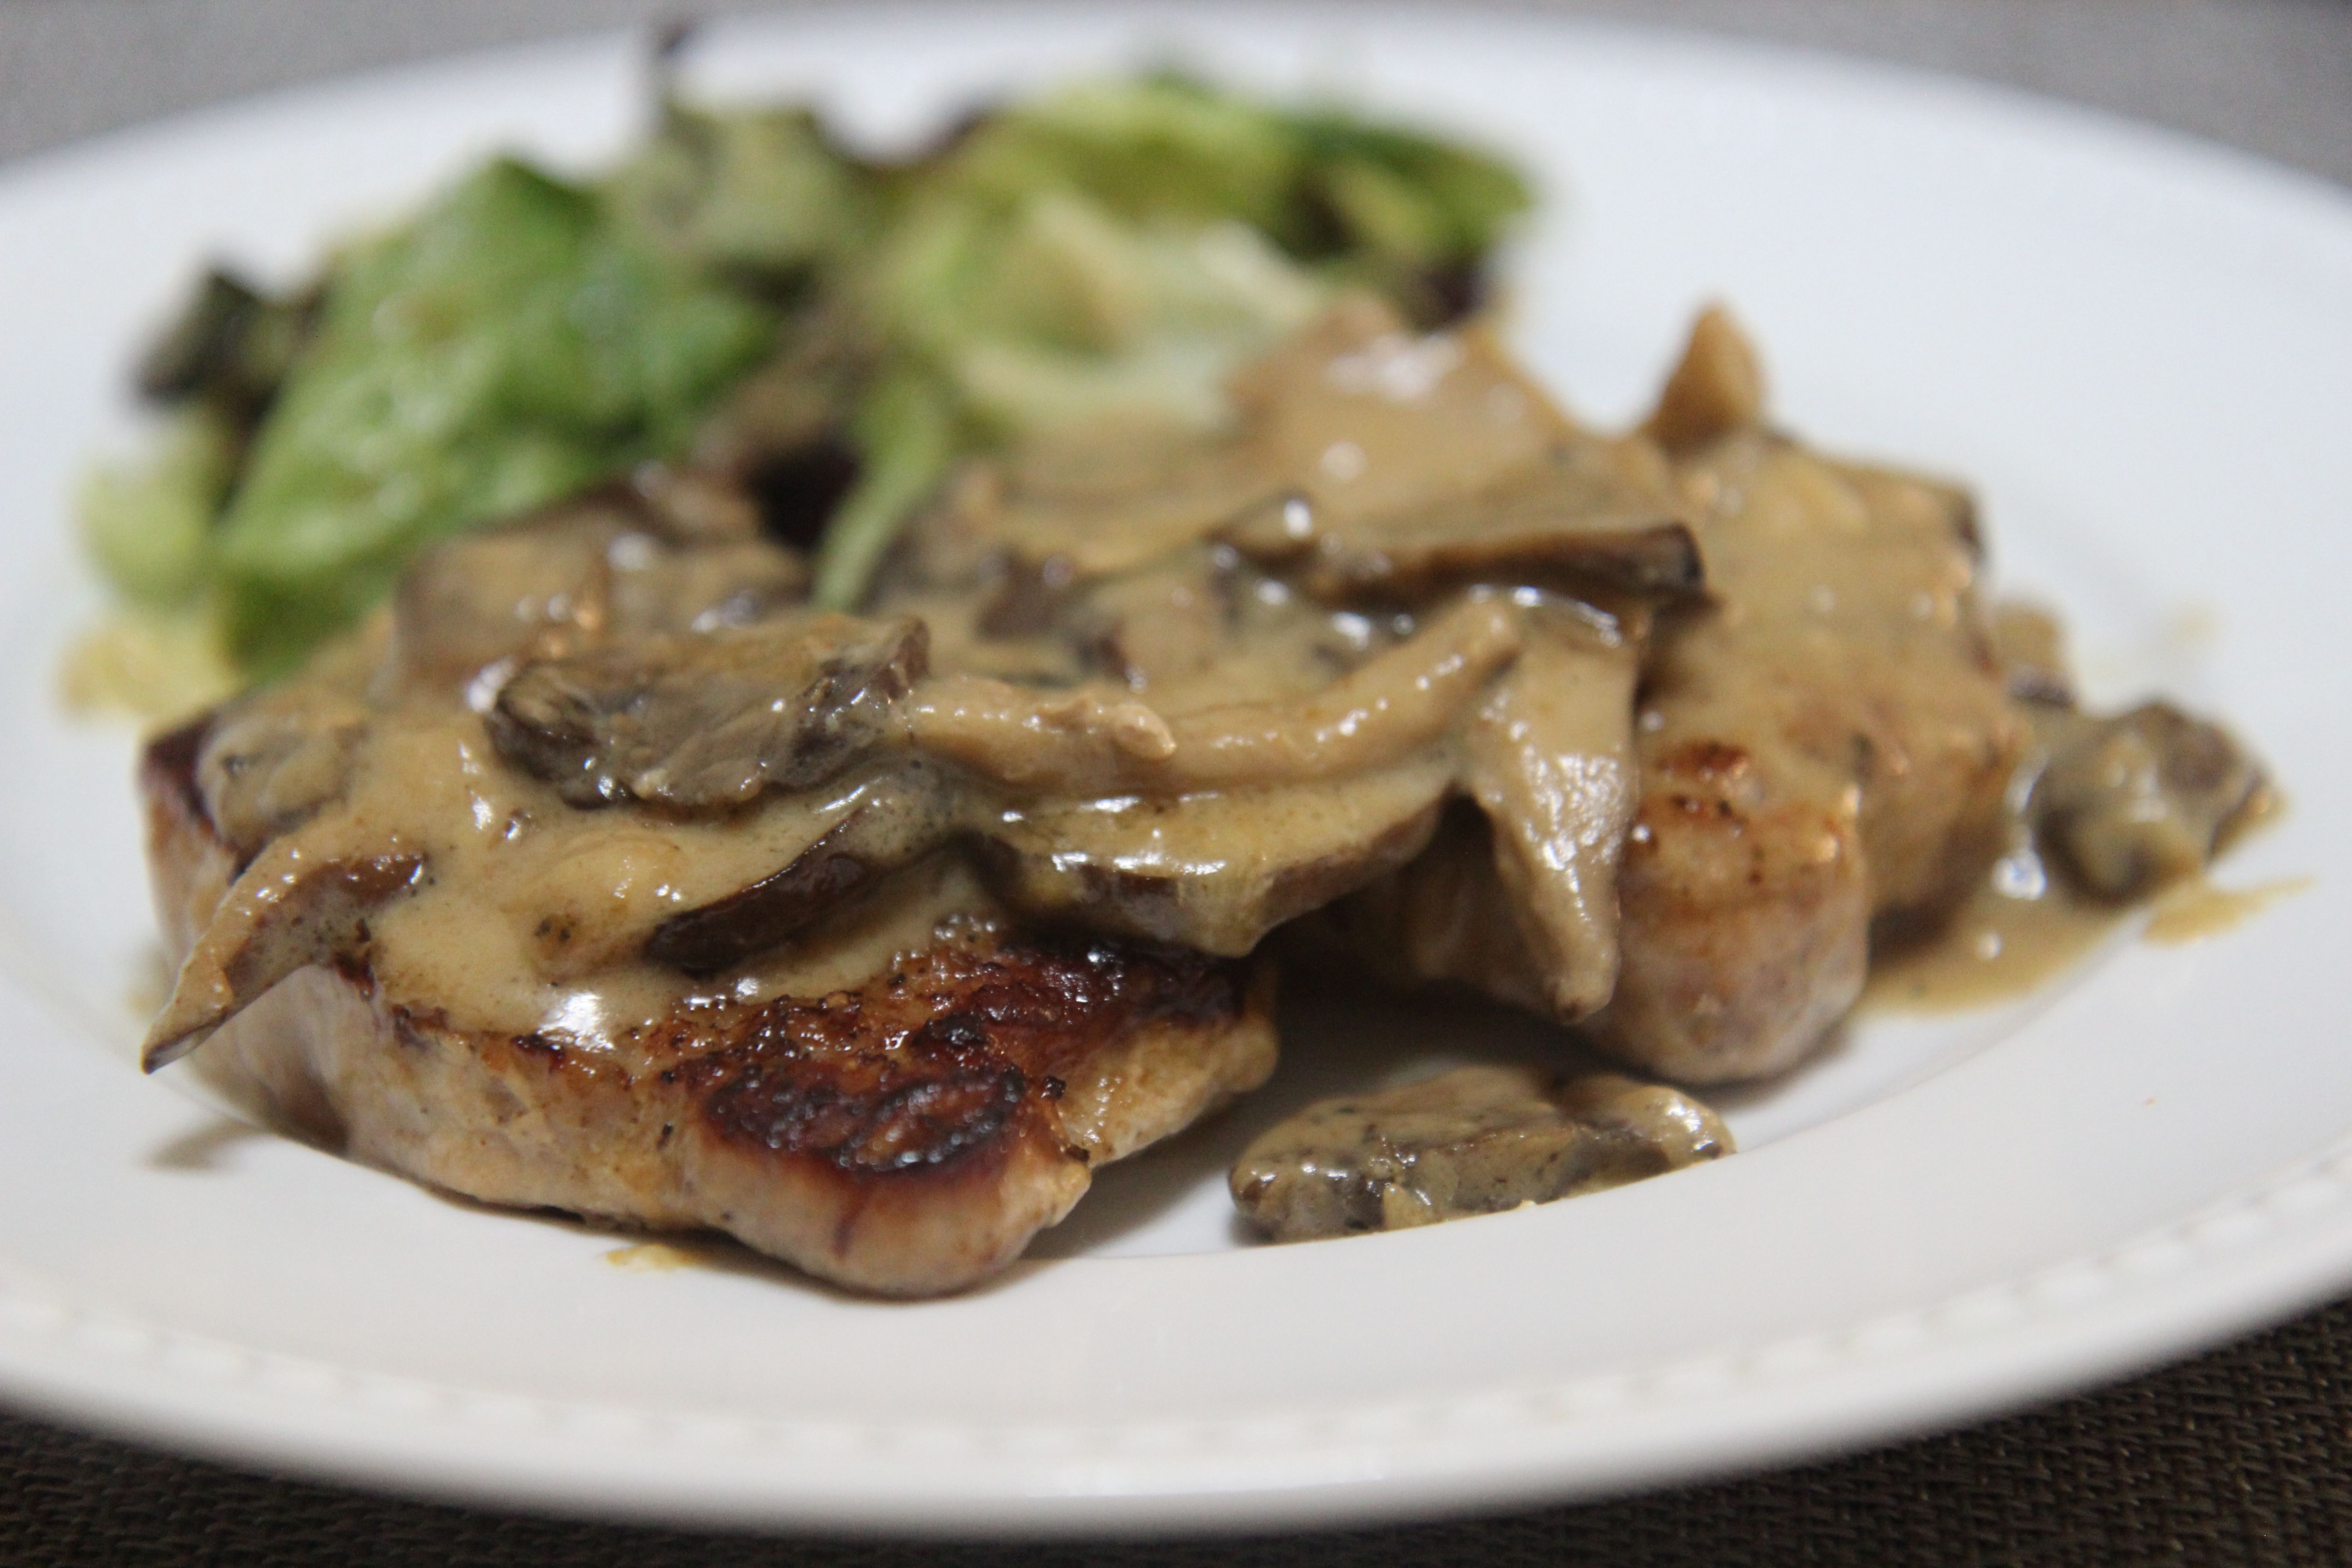 These pork chops are dressed in a creamy garlic sauce with mushrooms and onions.